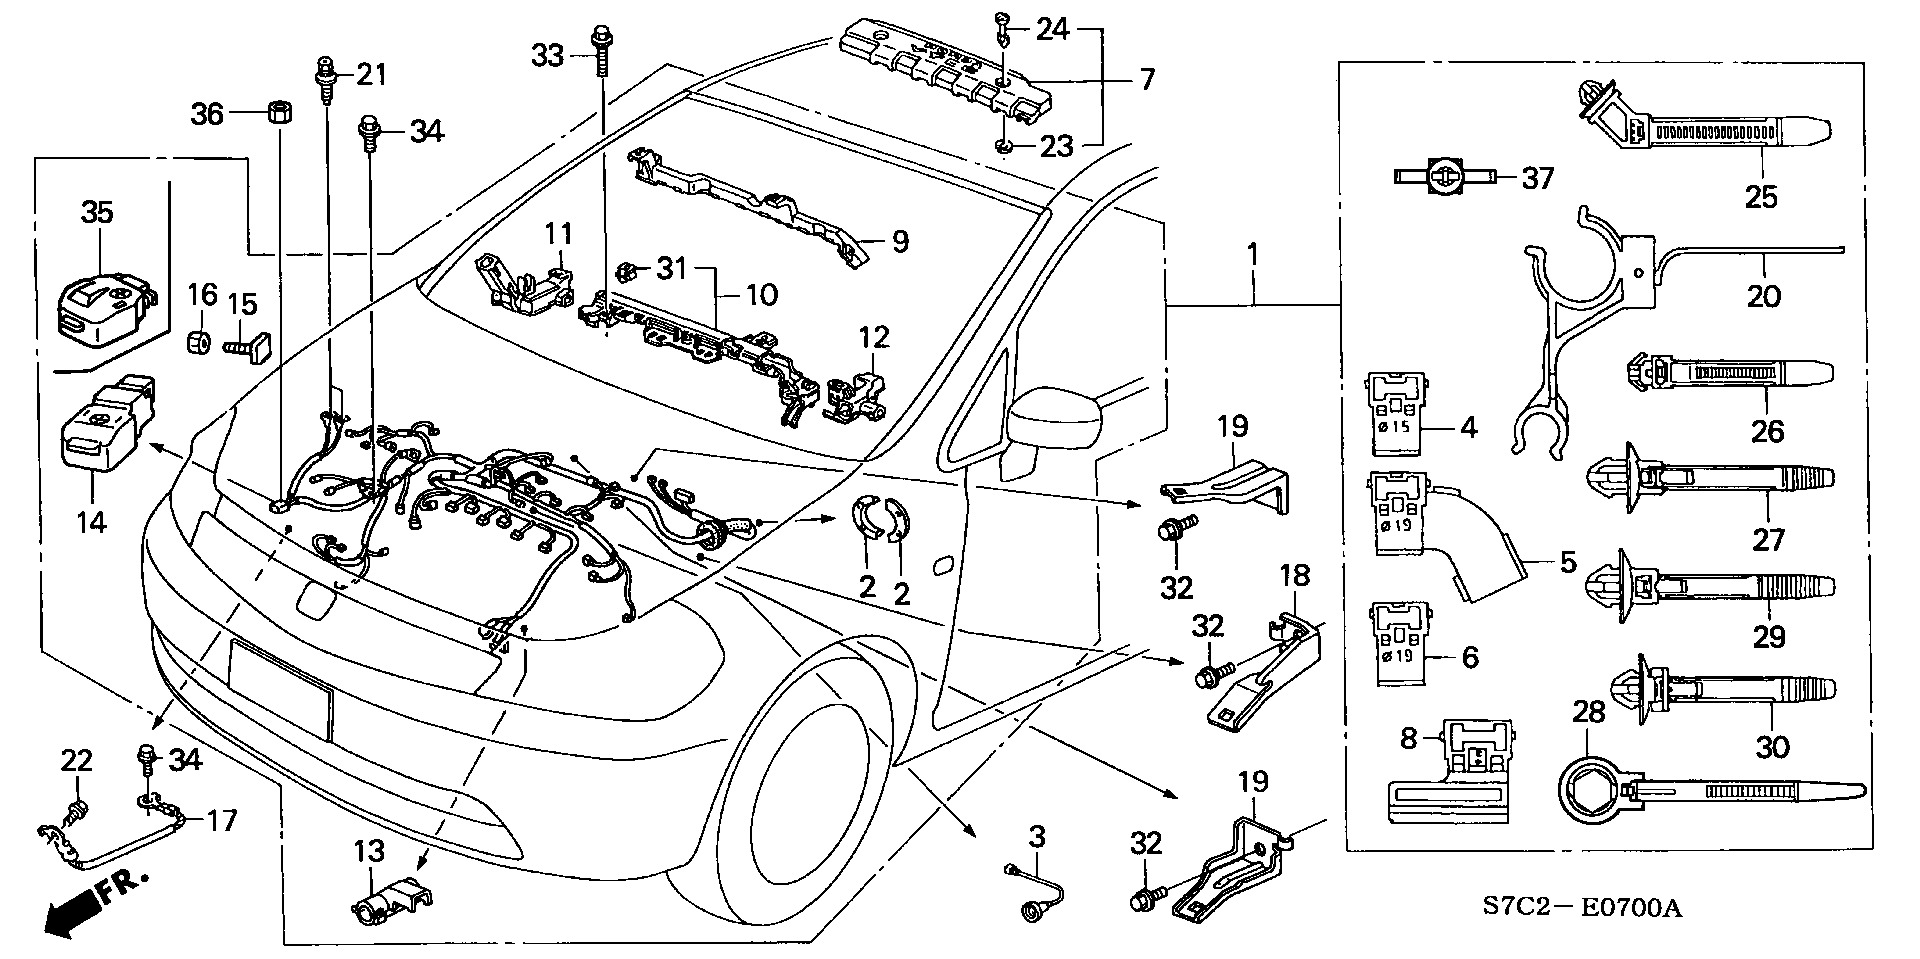 ENGINE WIRE HARNESS (1.7L)